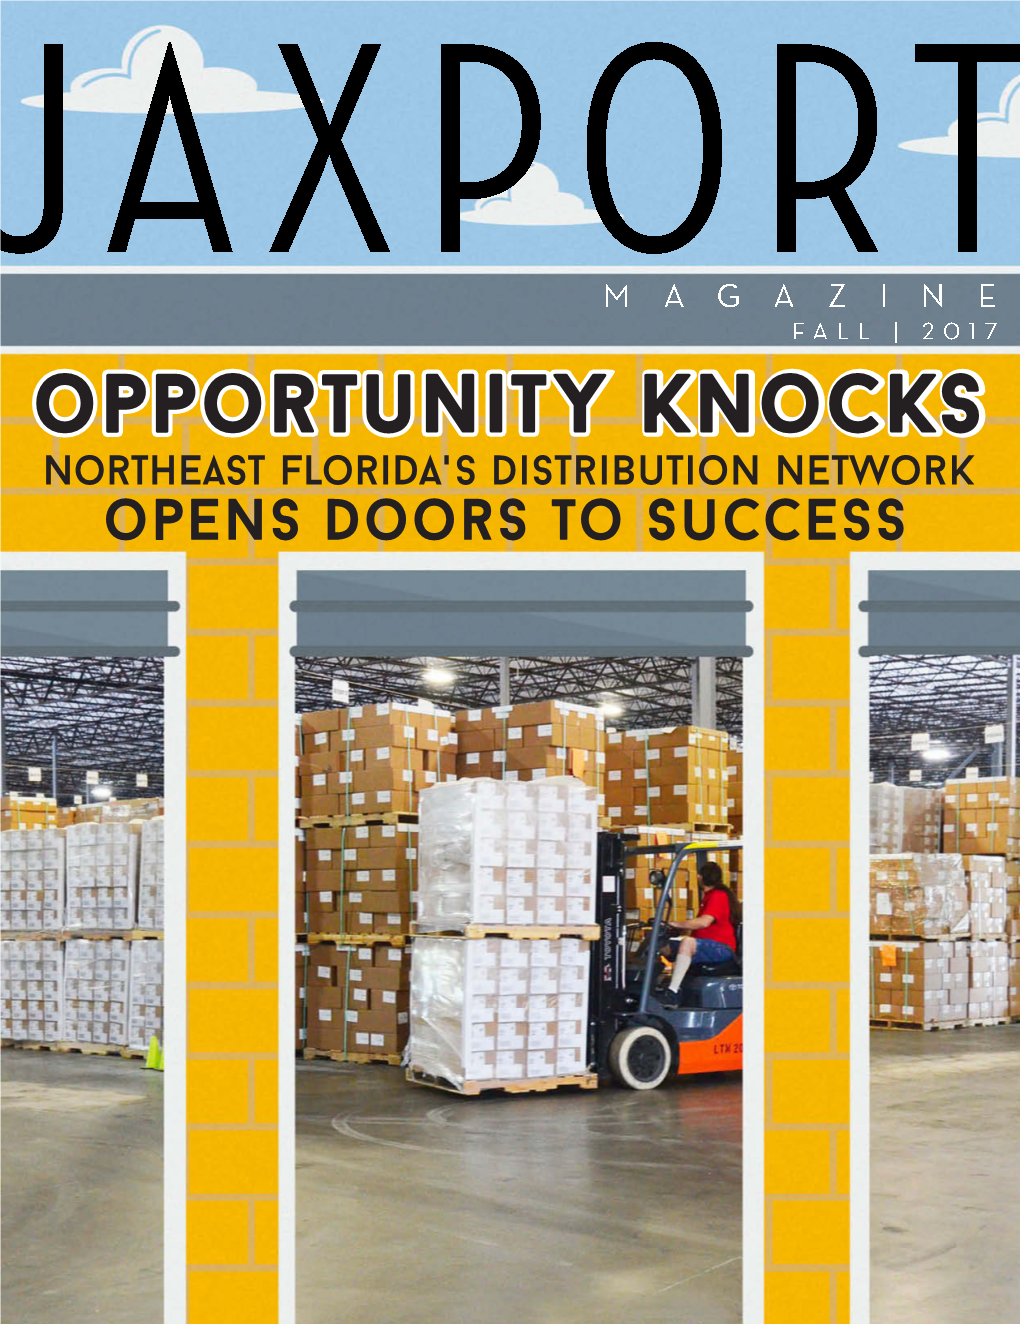 Opportunity Knocks Northeast Florida's Distribution Network Opens Doors to Success